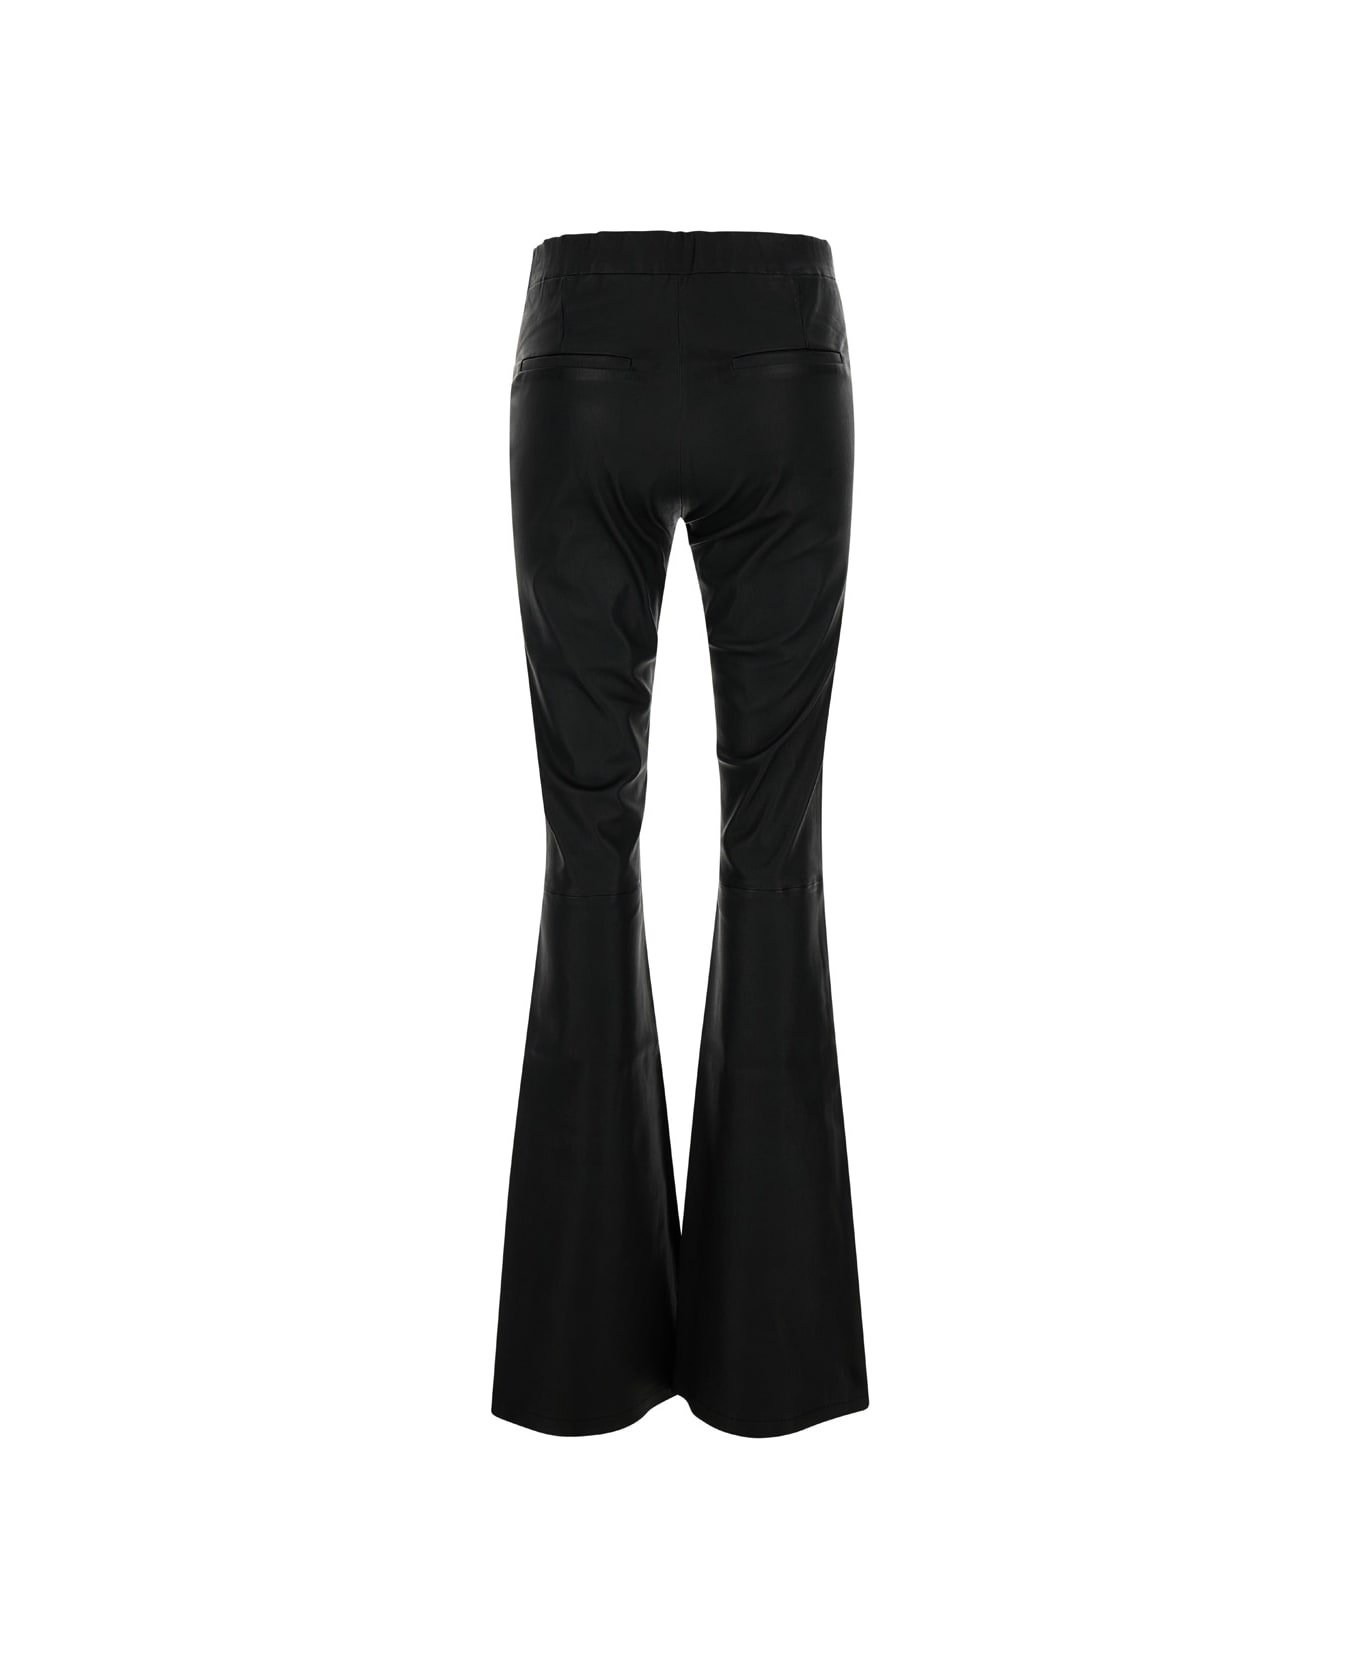 ARMA Black Flared Trousers In Leather Woman - Black